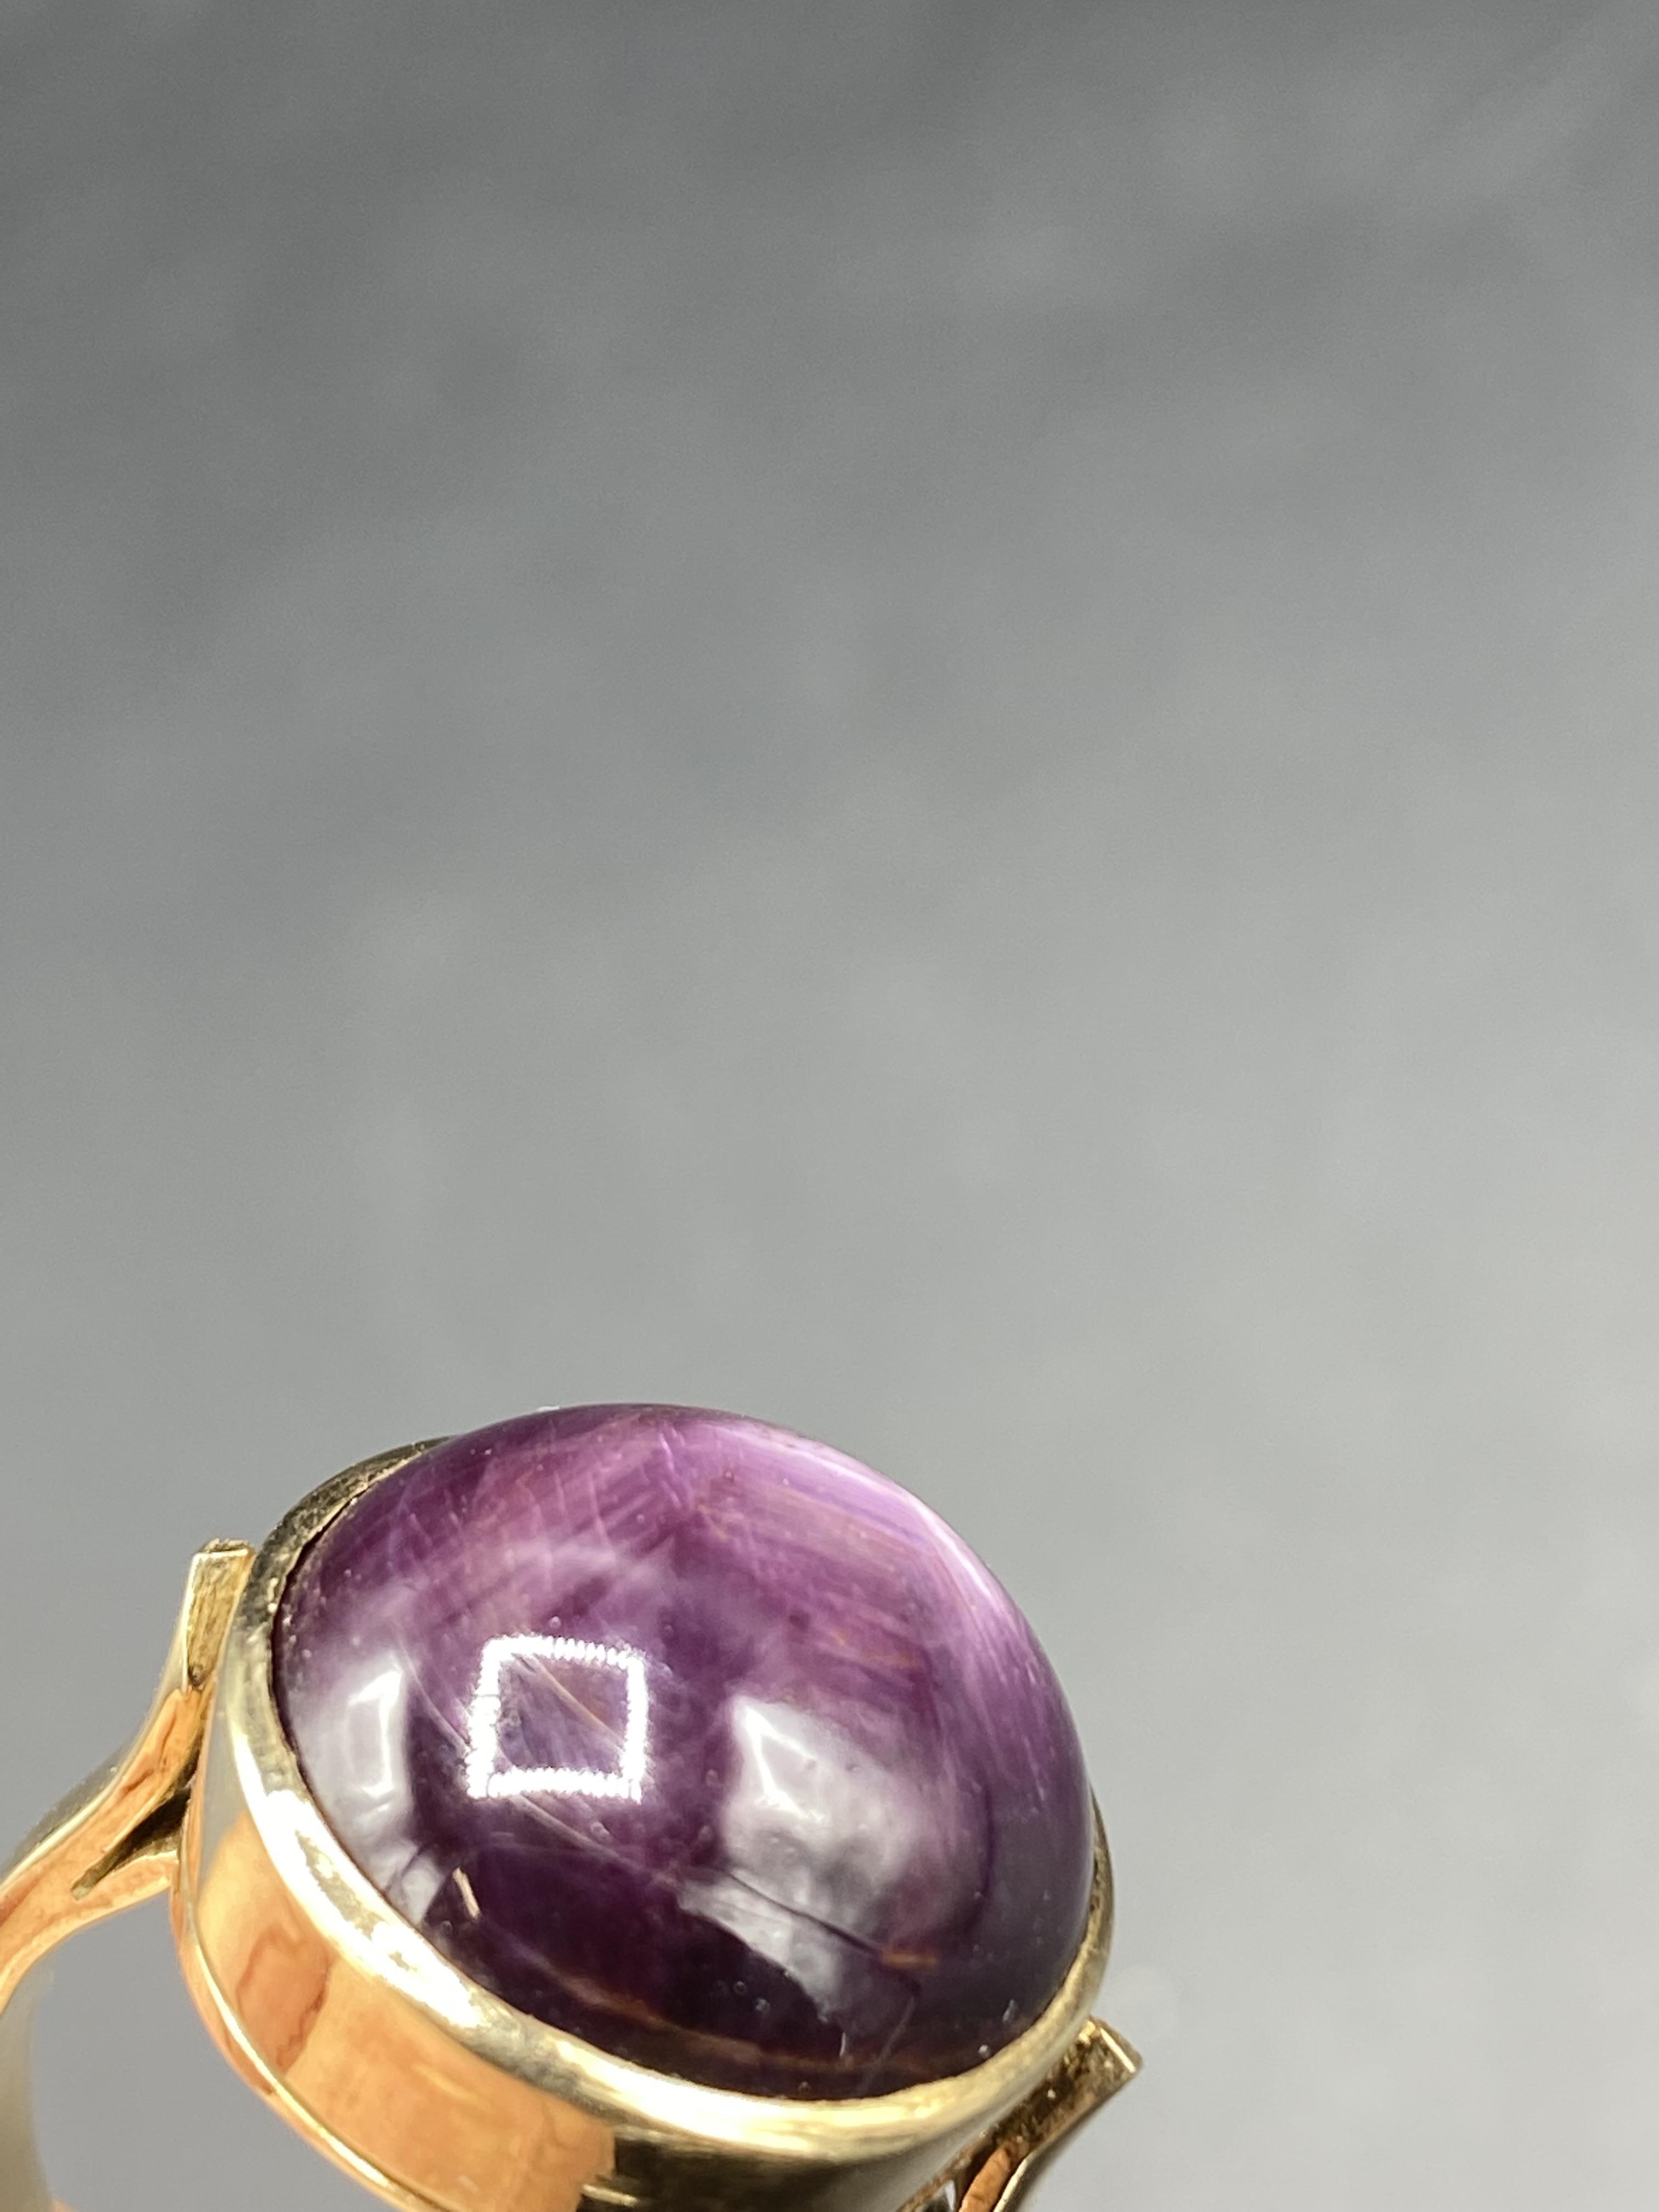 14ct gold ring set with a star sapphire - Image 6 of 6